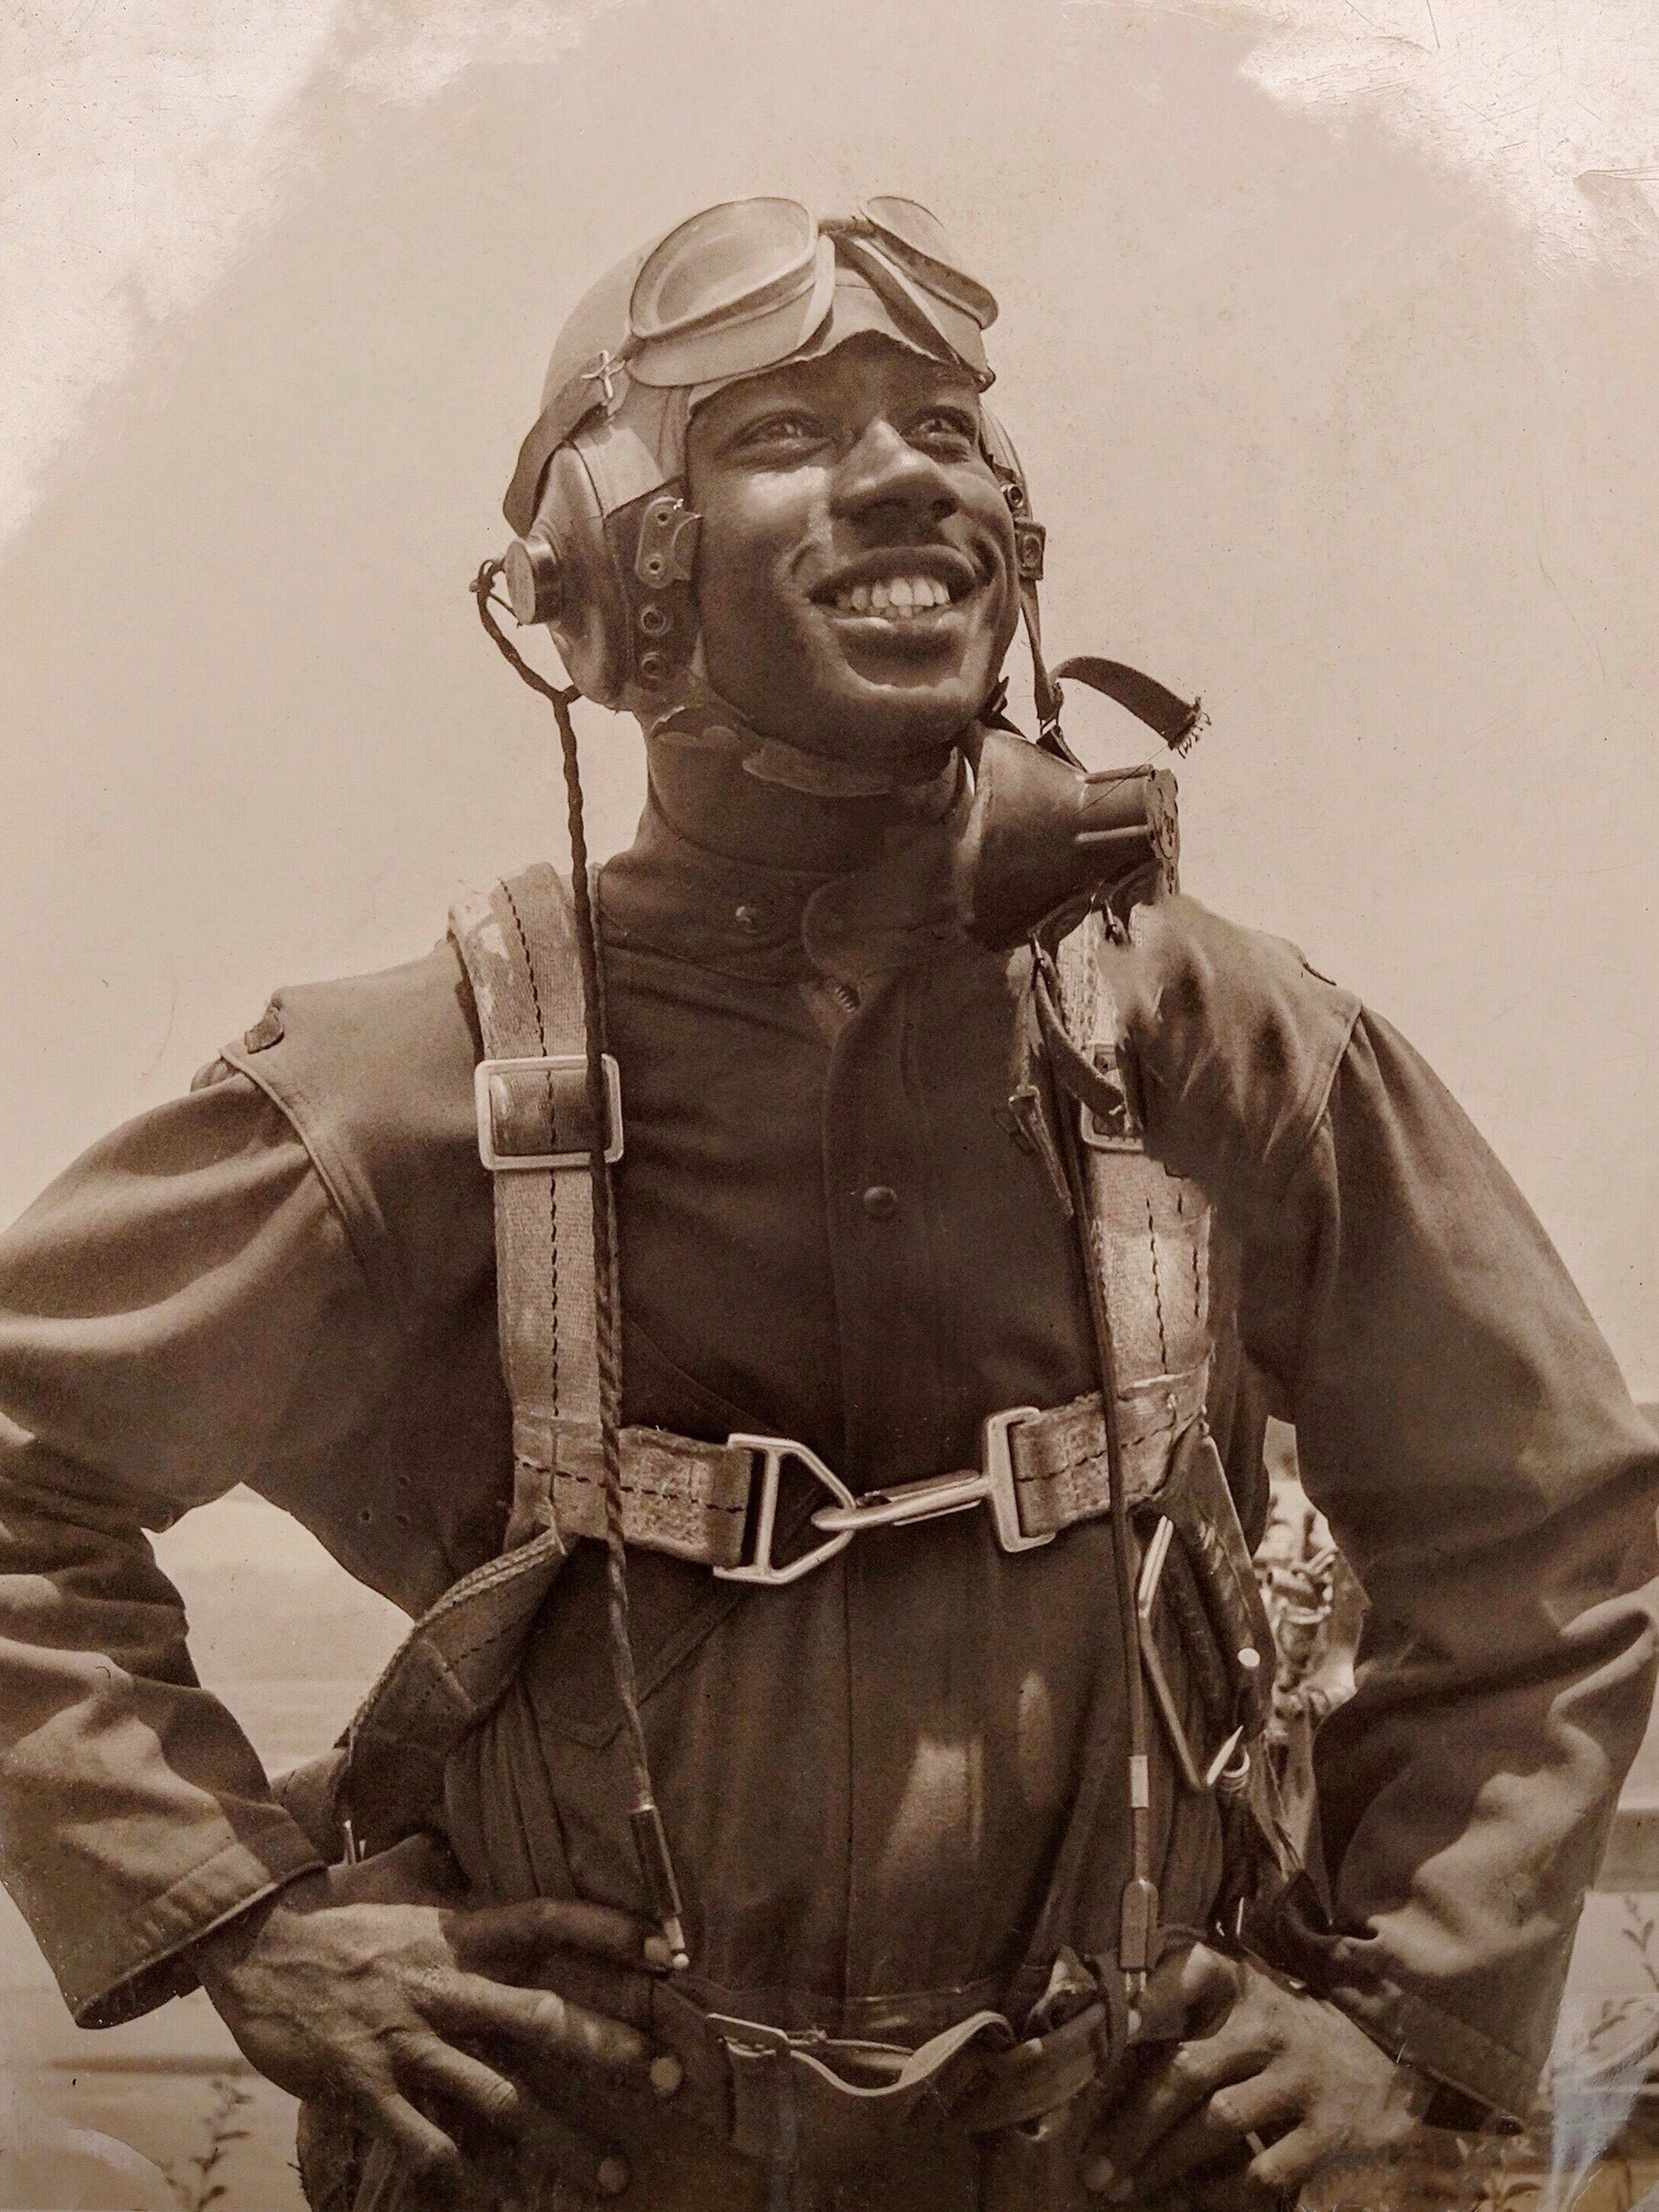 Wilkerson displays a photo in her home of her father in his Tuskegee Airmen uniform